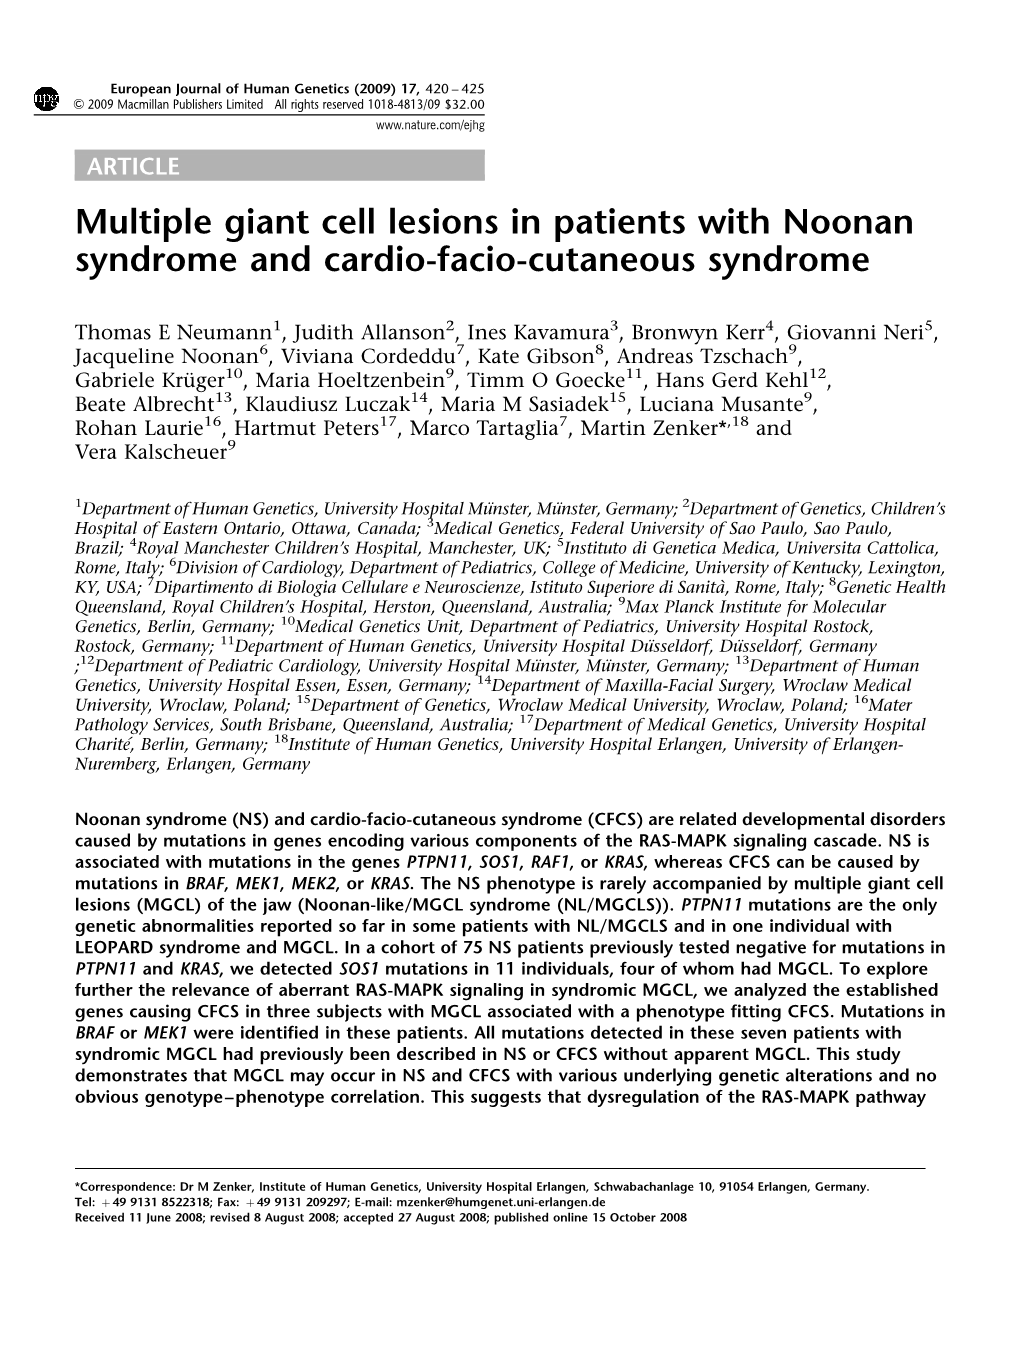 Multiple Giant Cell Lesions in Patients with Noonan Syndrome and Cardio-Facio-Cutaneous Syndrome